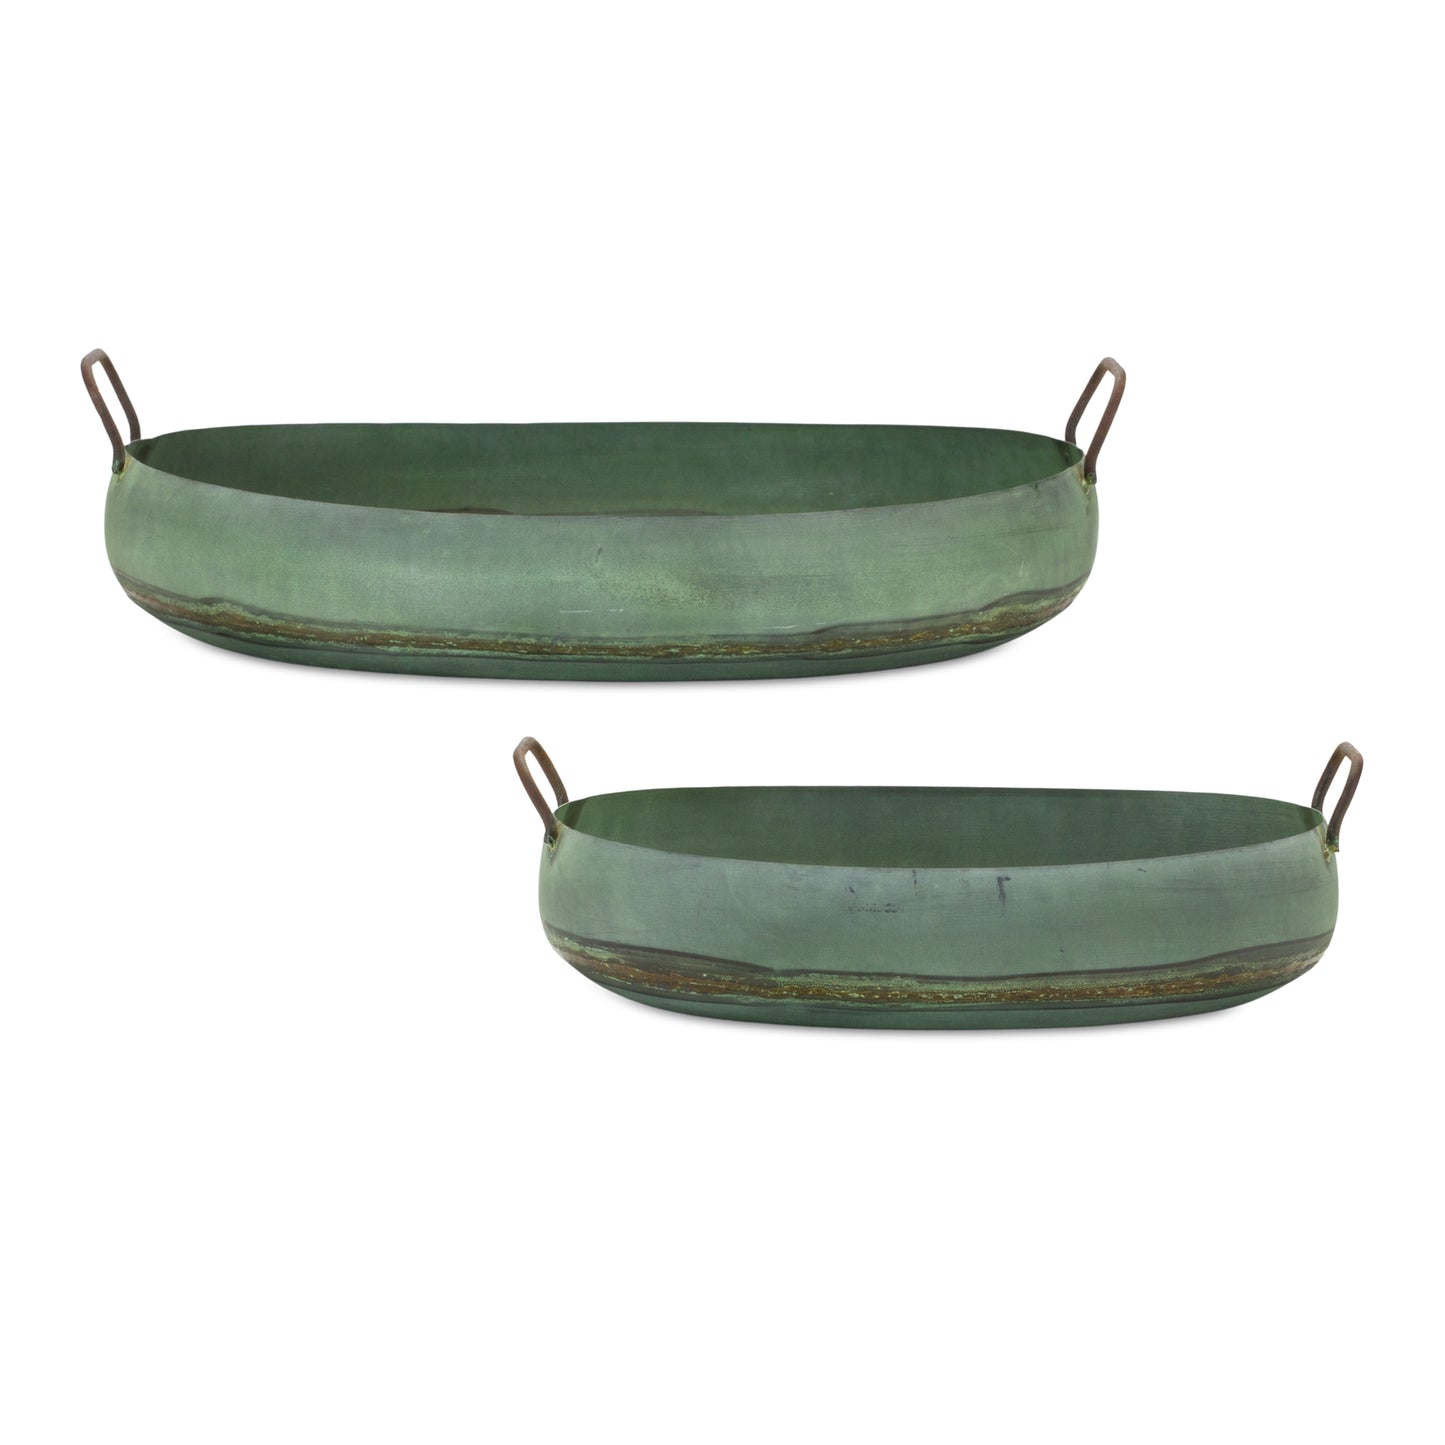 Metal Oval Tray Platner with Distressed Green Finish (Set of 2)